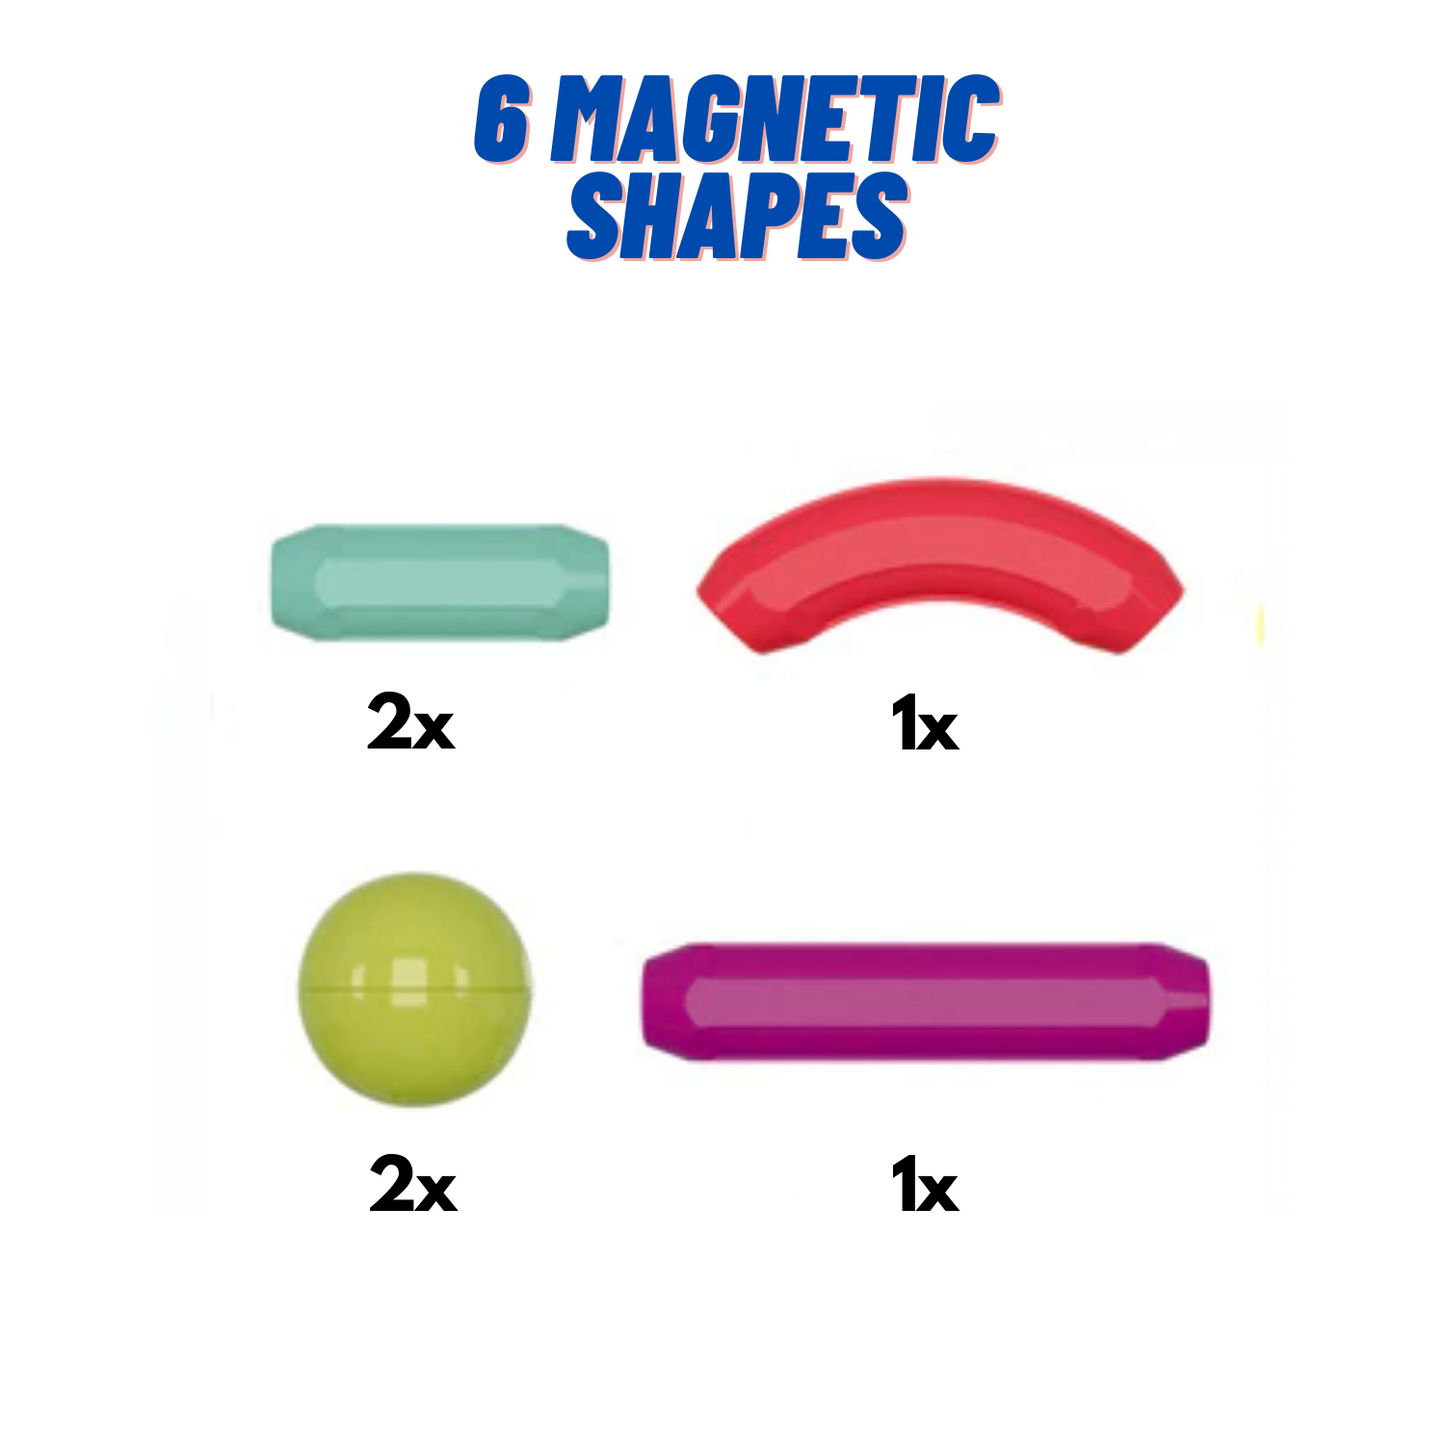 6x - Magnetic Shapes